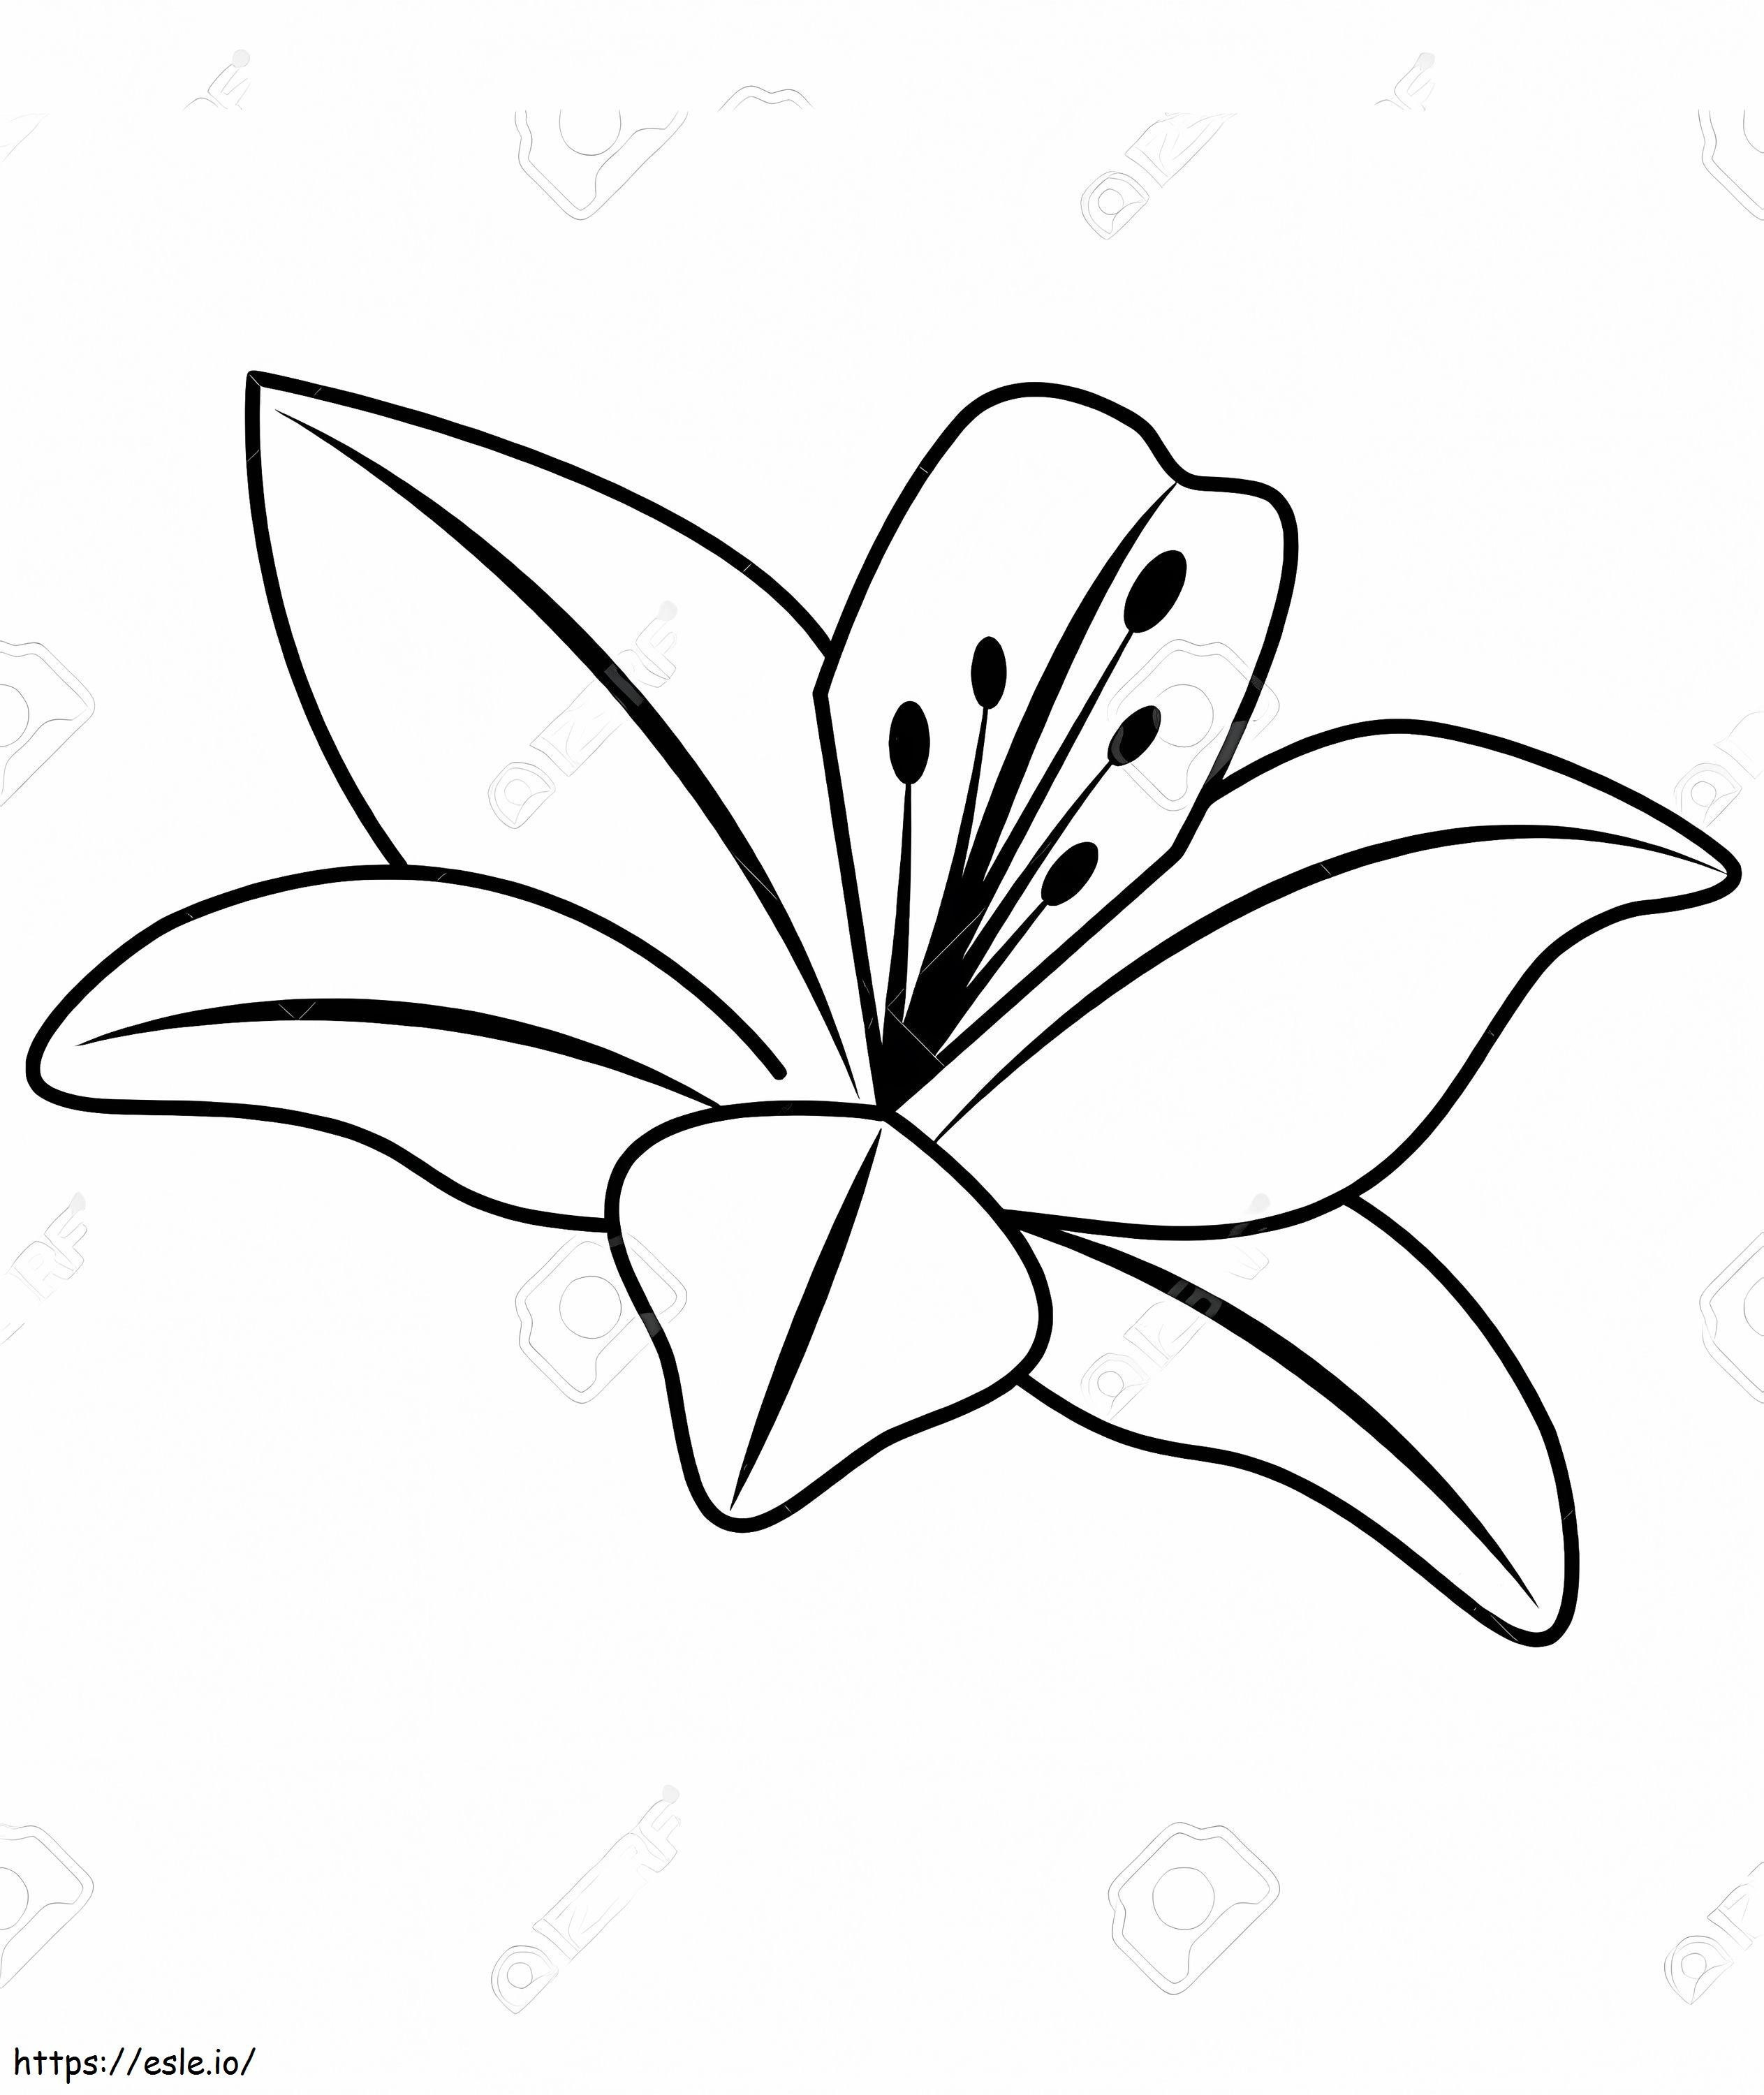 Lily Flower 2 coloring page